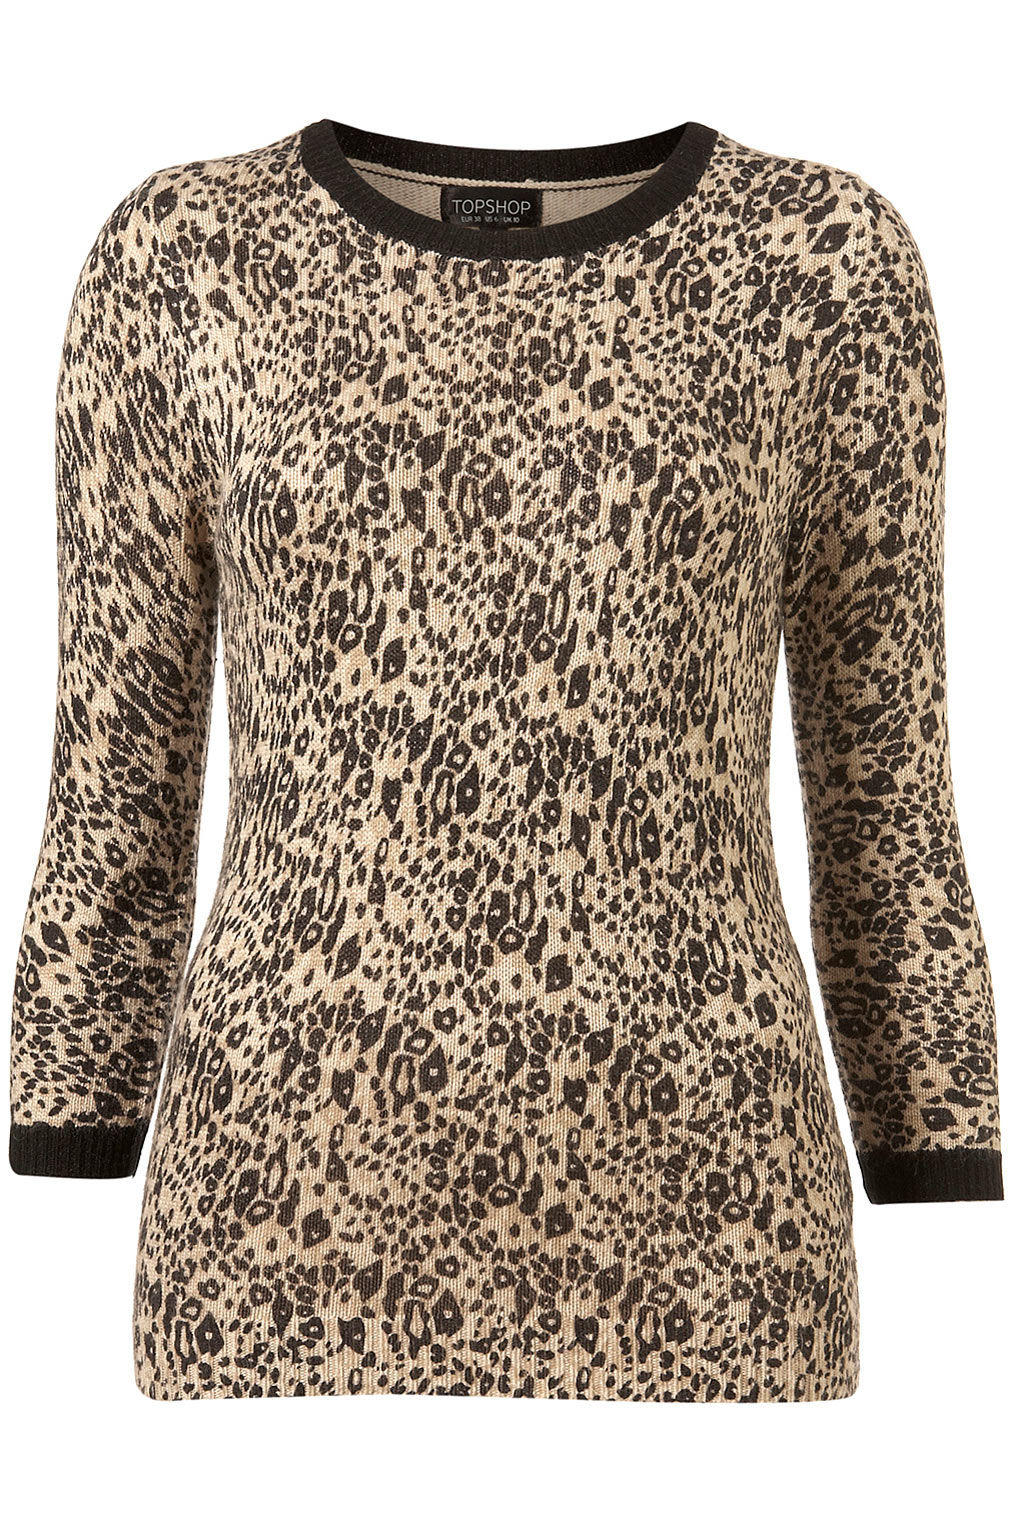 Topshop Knitted Leopard Print Jumper in Animal (animal print) | Lyst